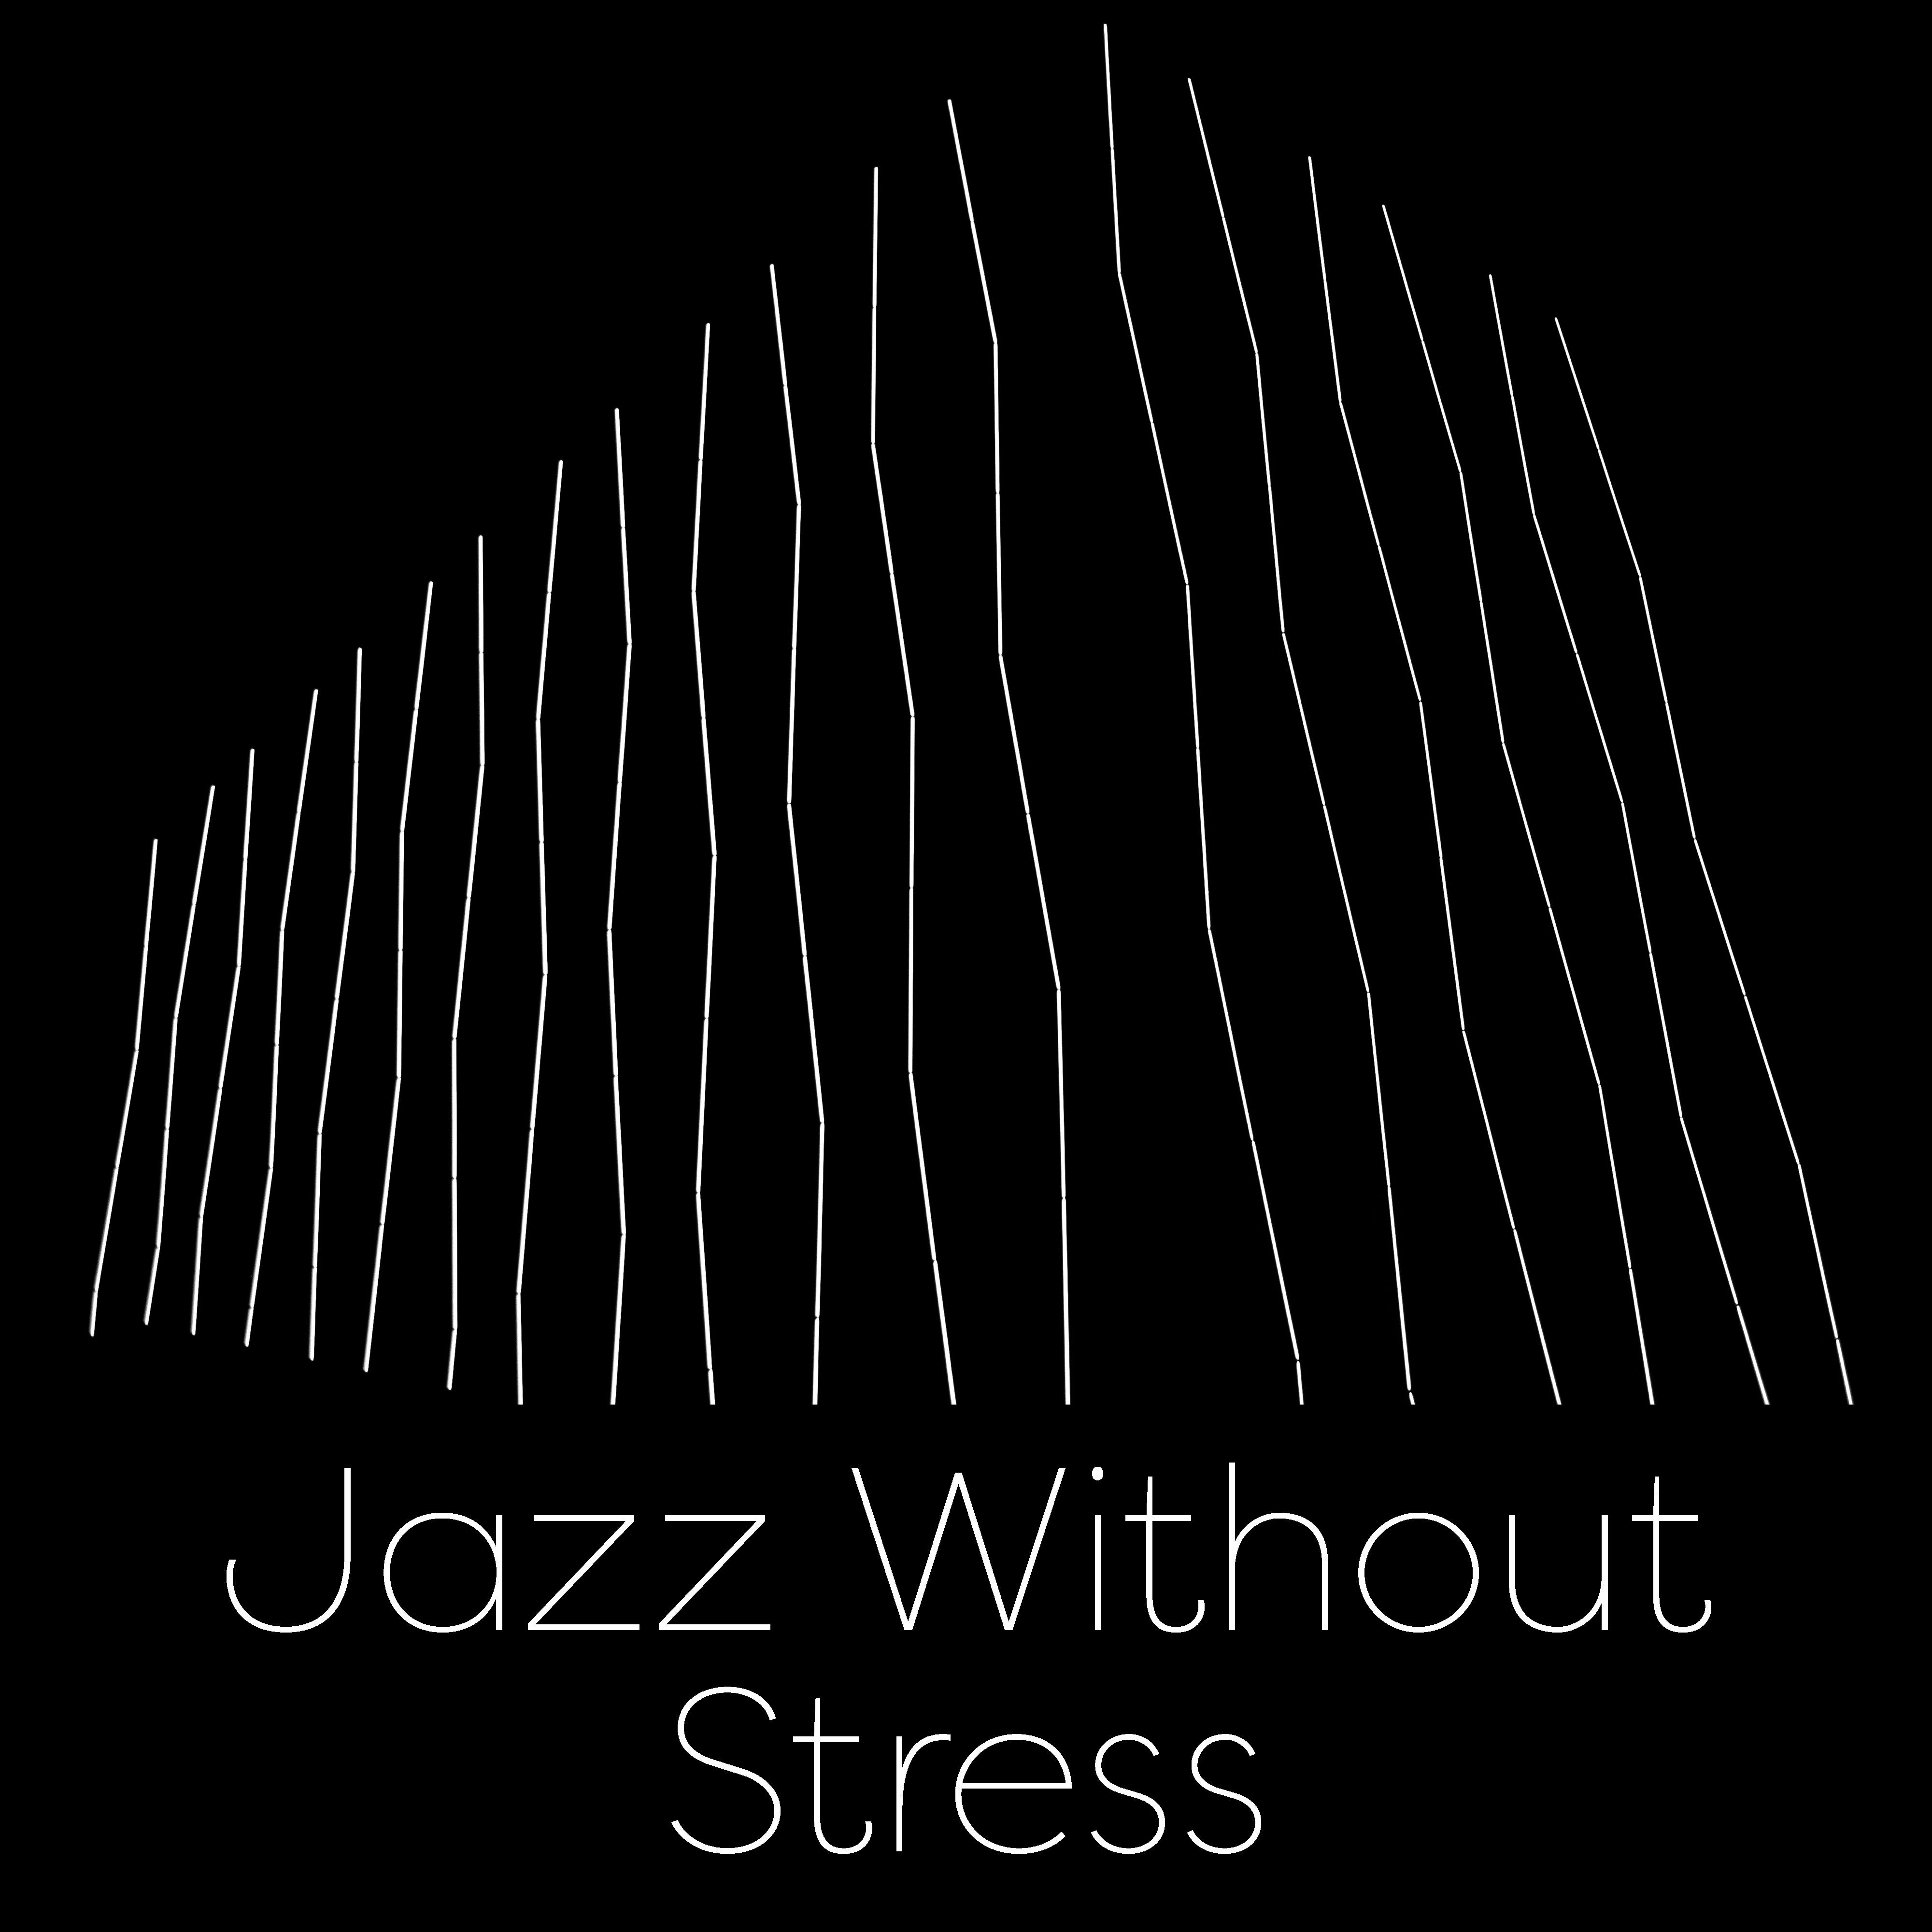 Jazz Without Stress  Calming Sounds of Jazz, Easy Listening, Deal with Stress